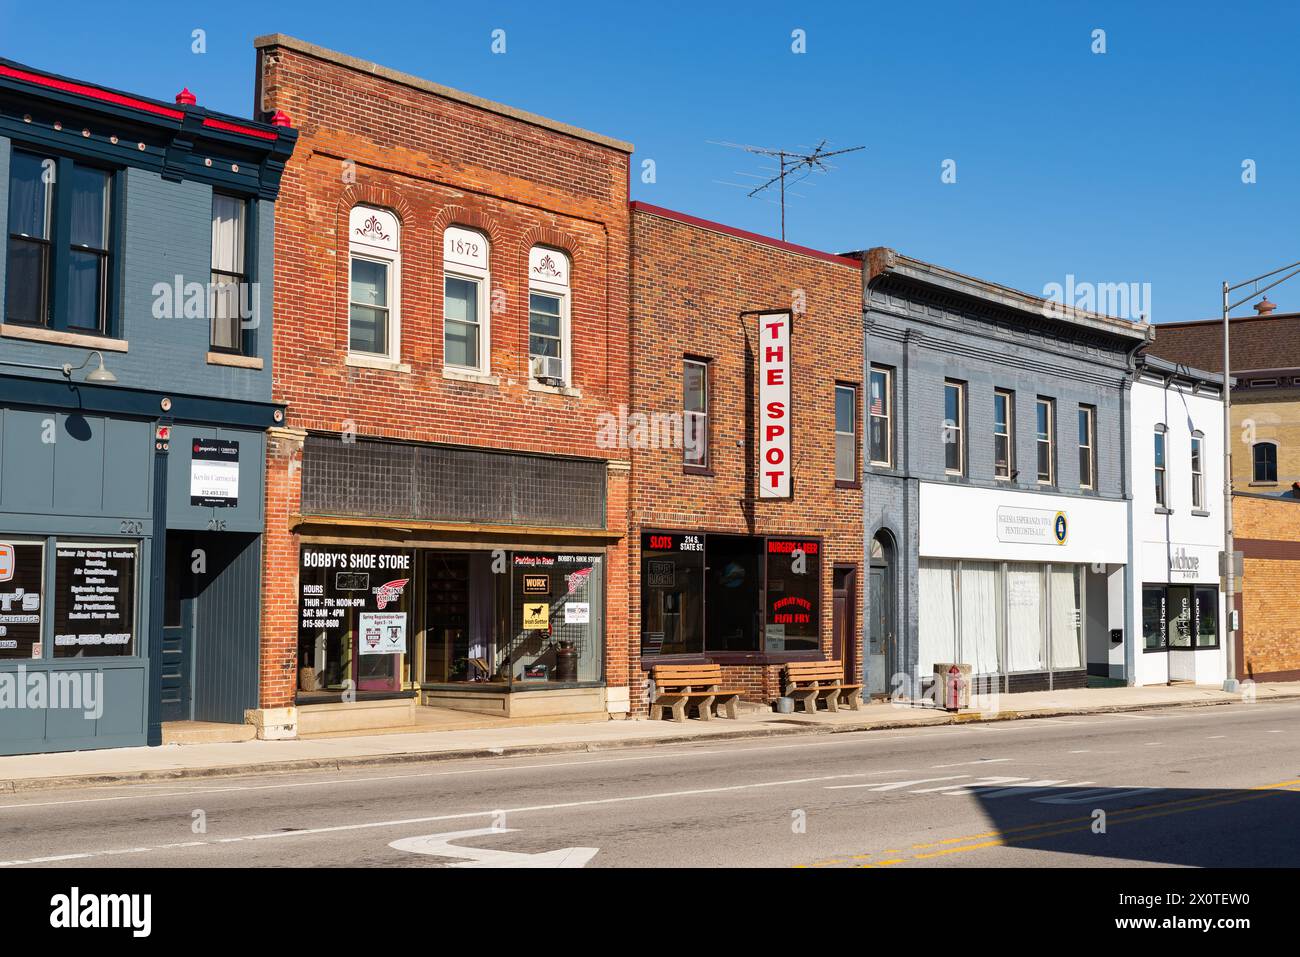 Marengo, Illinois - United States - April 8th, 2024: Downtown buildings and storefronts on South State Street in Marengo, Illinois, USA. Stock Photo